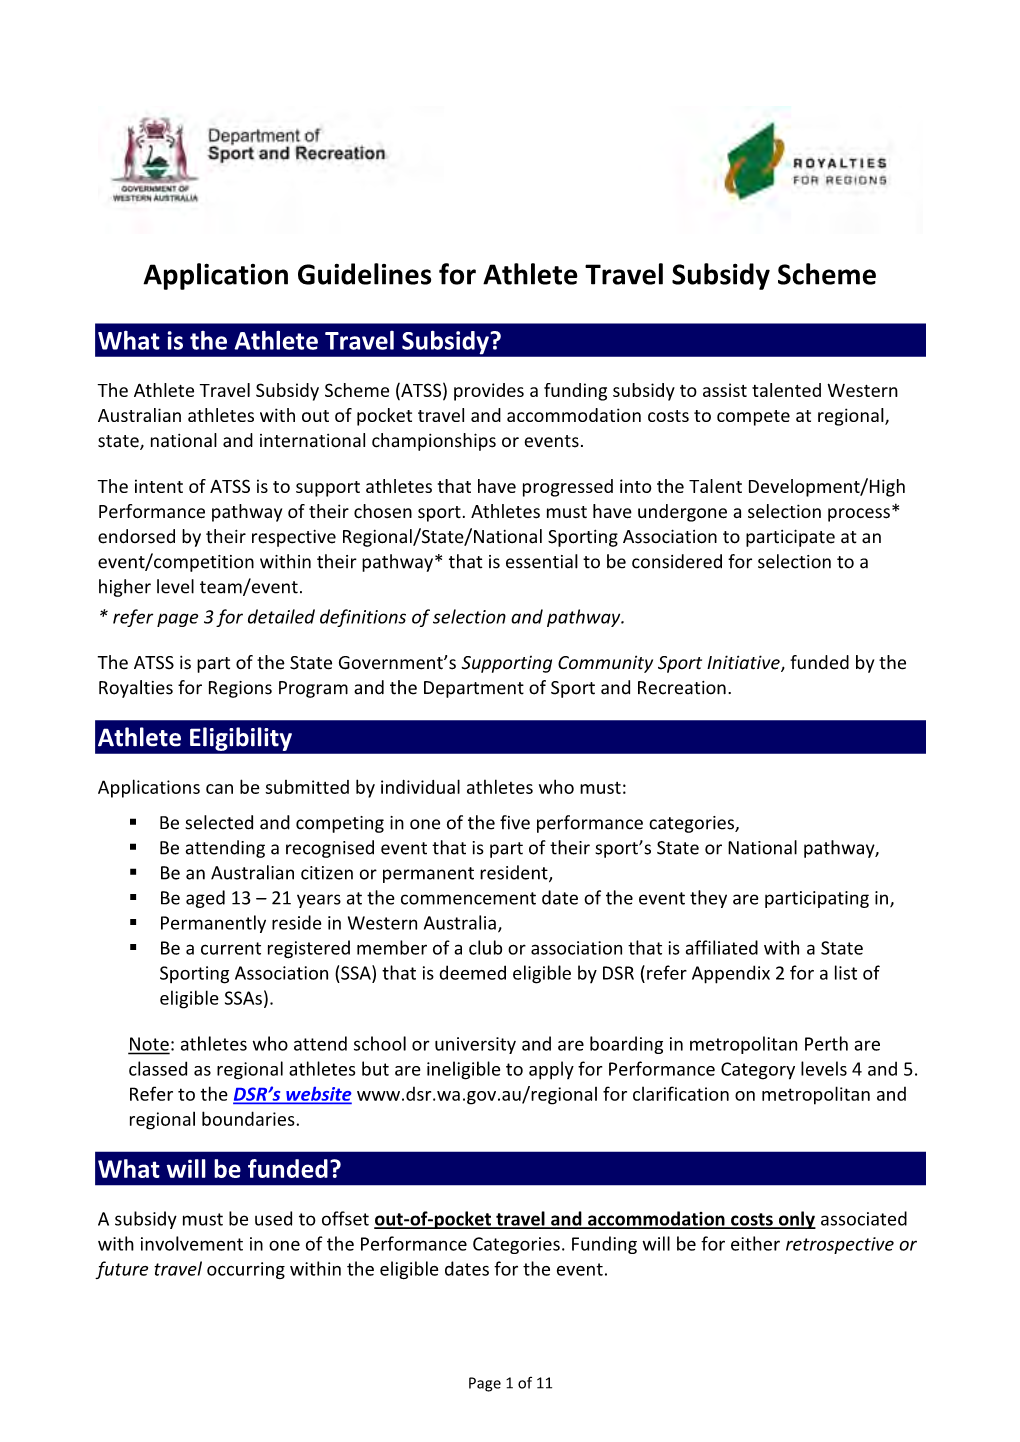 Application Guidelines for Athlete Travel Subsidy Scheme